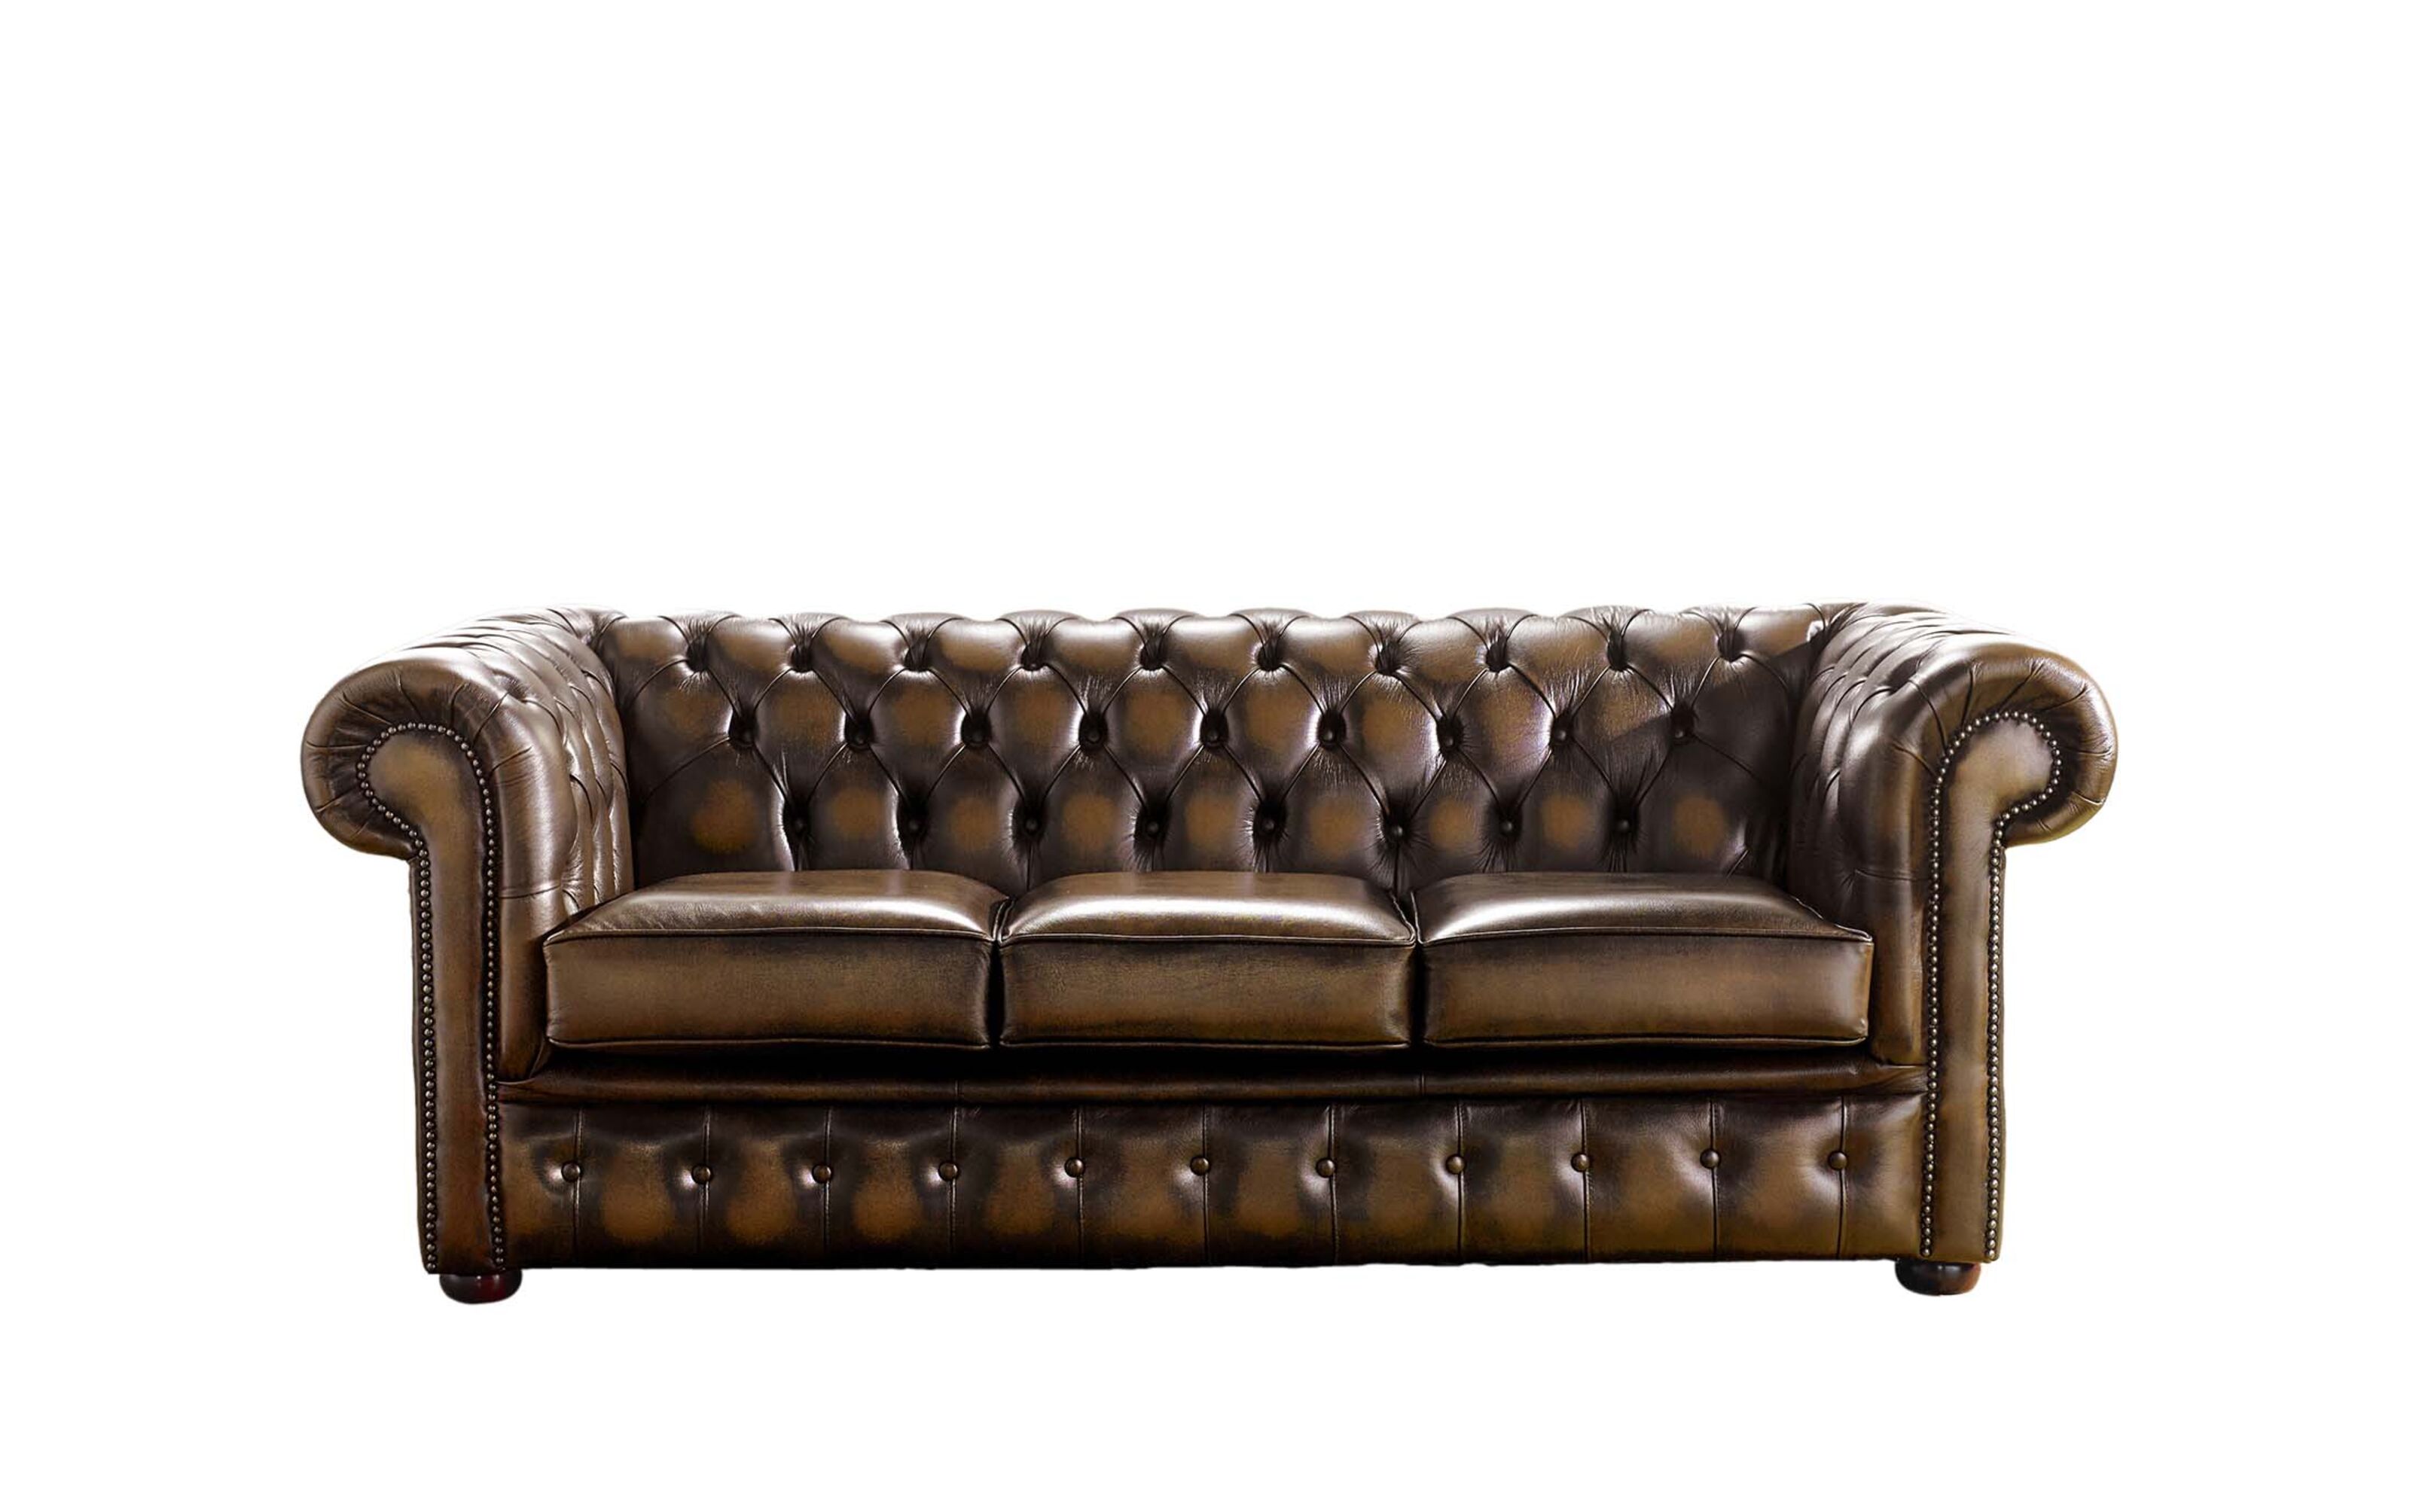 Discovering Nearby Leather Chesterfield Sofas Timeless Luxury Just Around the Corner  %Post Title